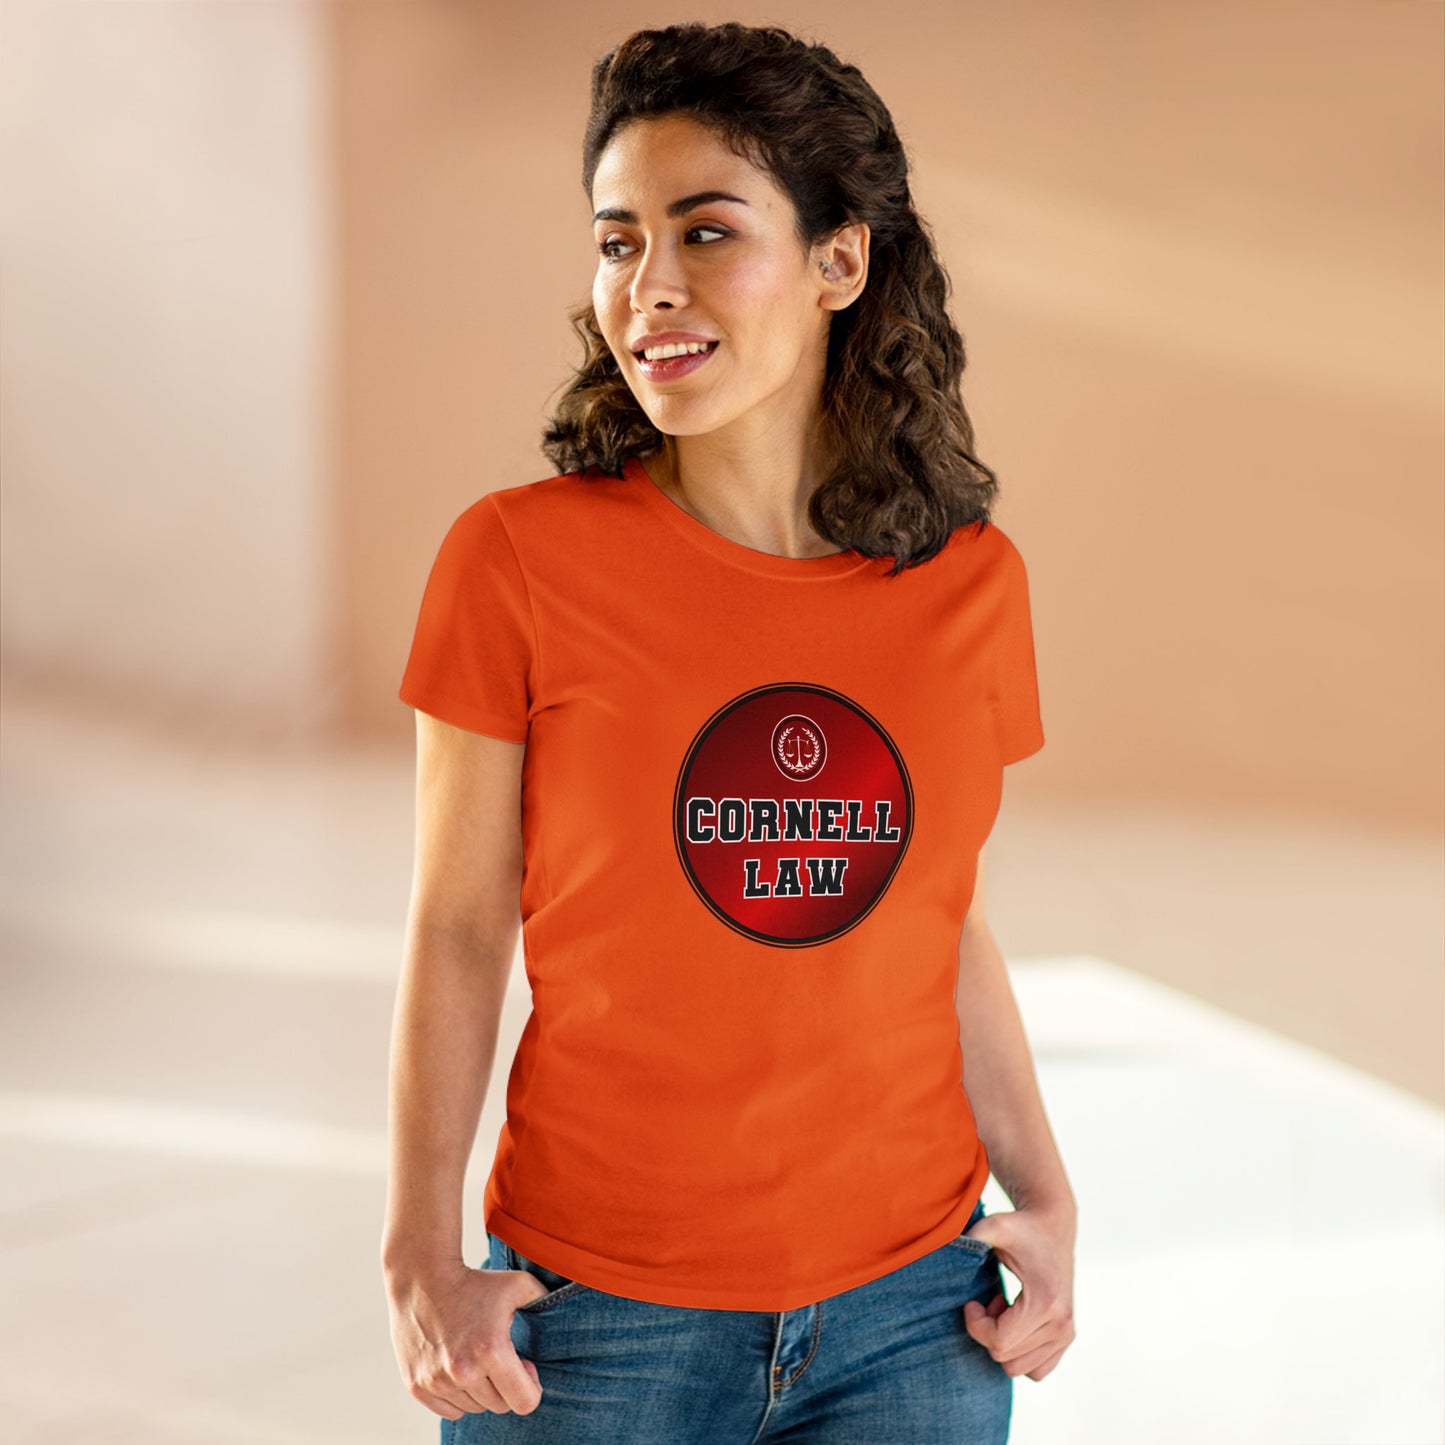 Cornell University Law School, Scales of Justice- Adult, Semi-fitted, Smaller Size Image, T-shirt